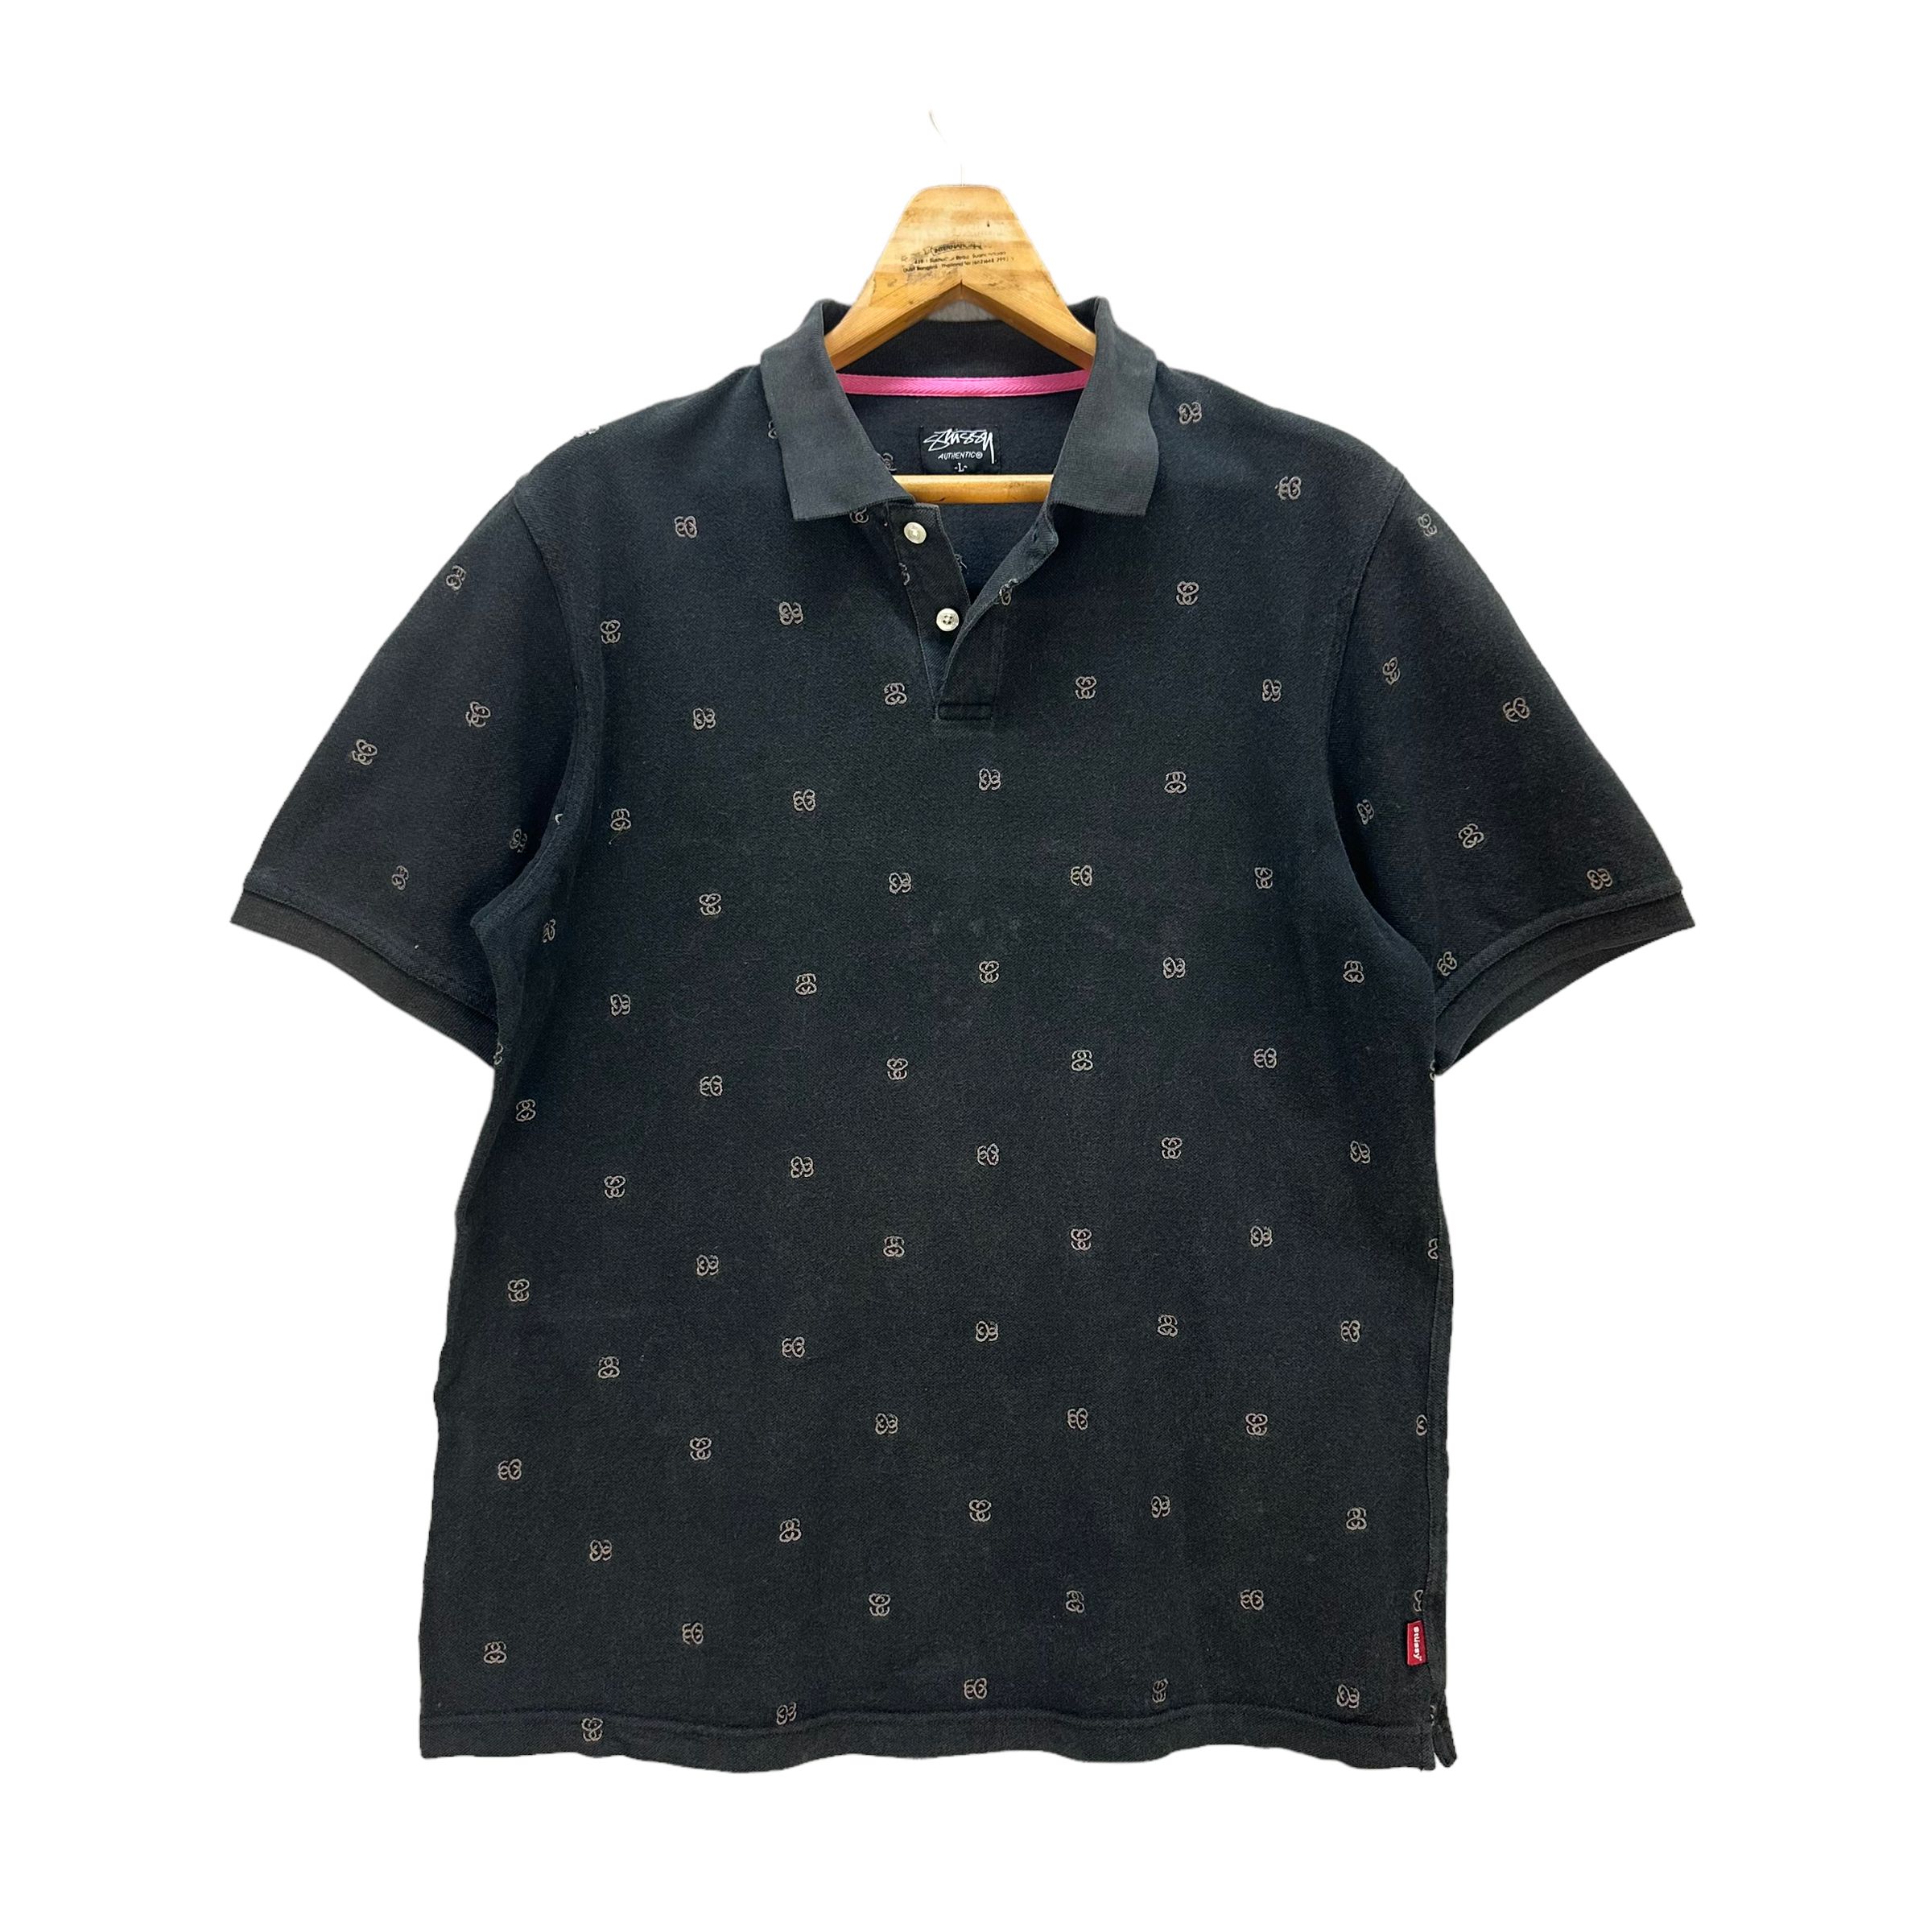 STUSSY EMBROIDERY ALLOVER SMALL LOGO POLOS #8537-013 - 1